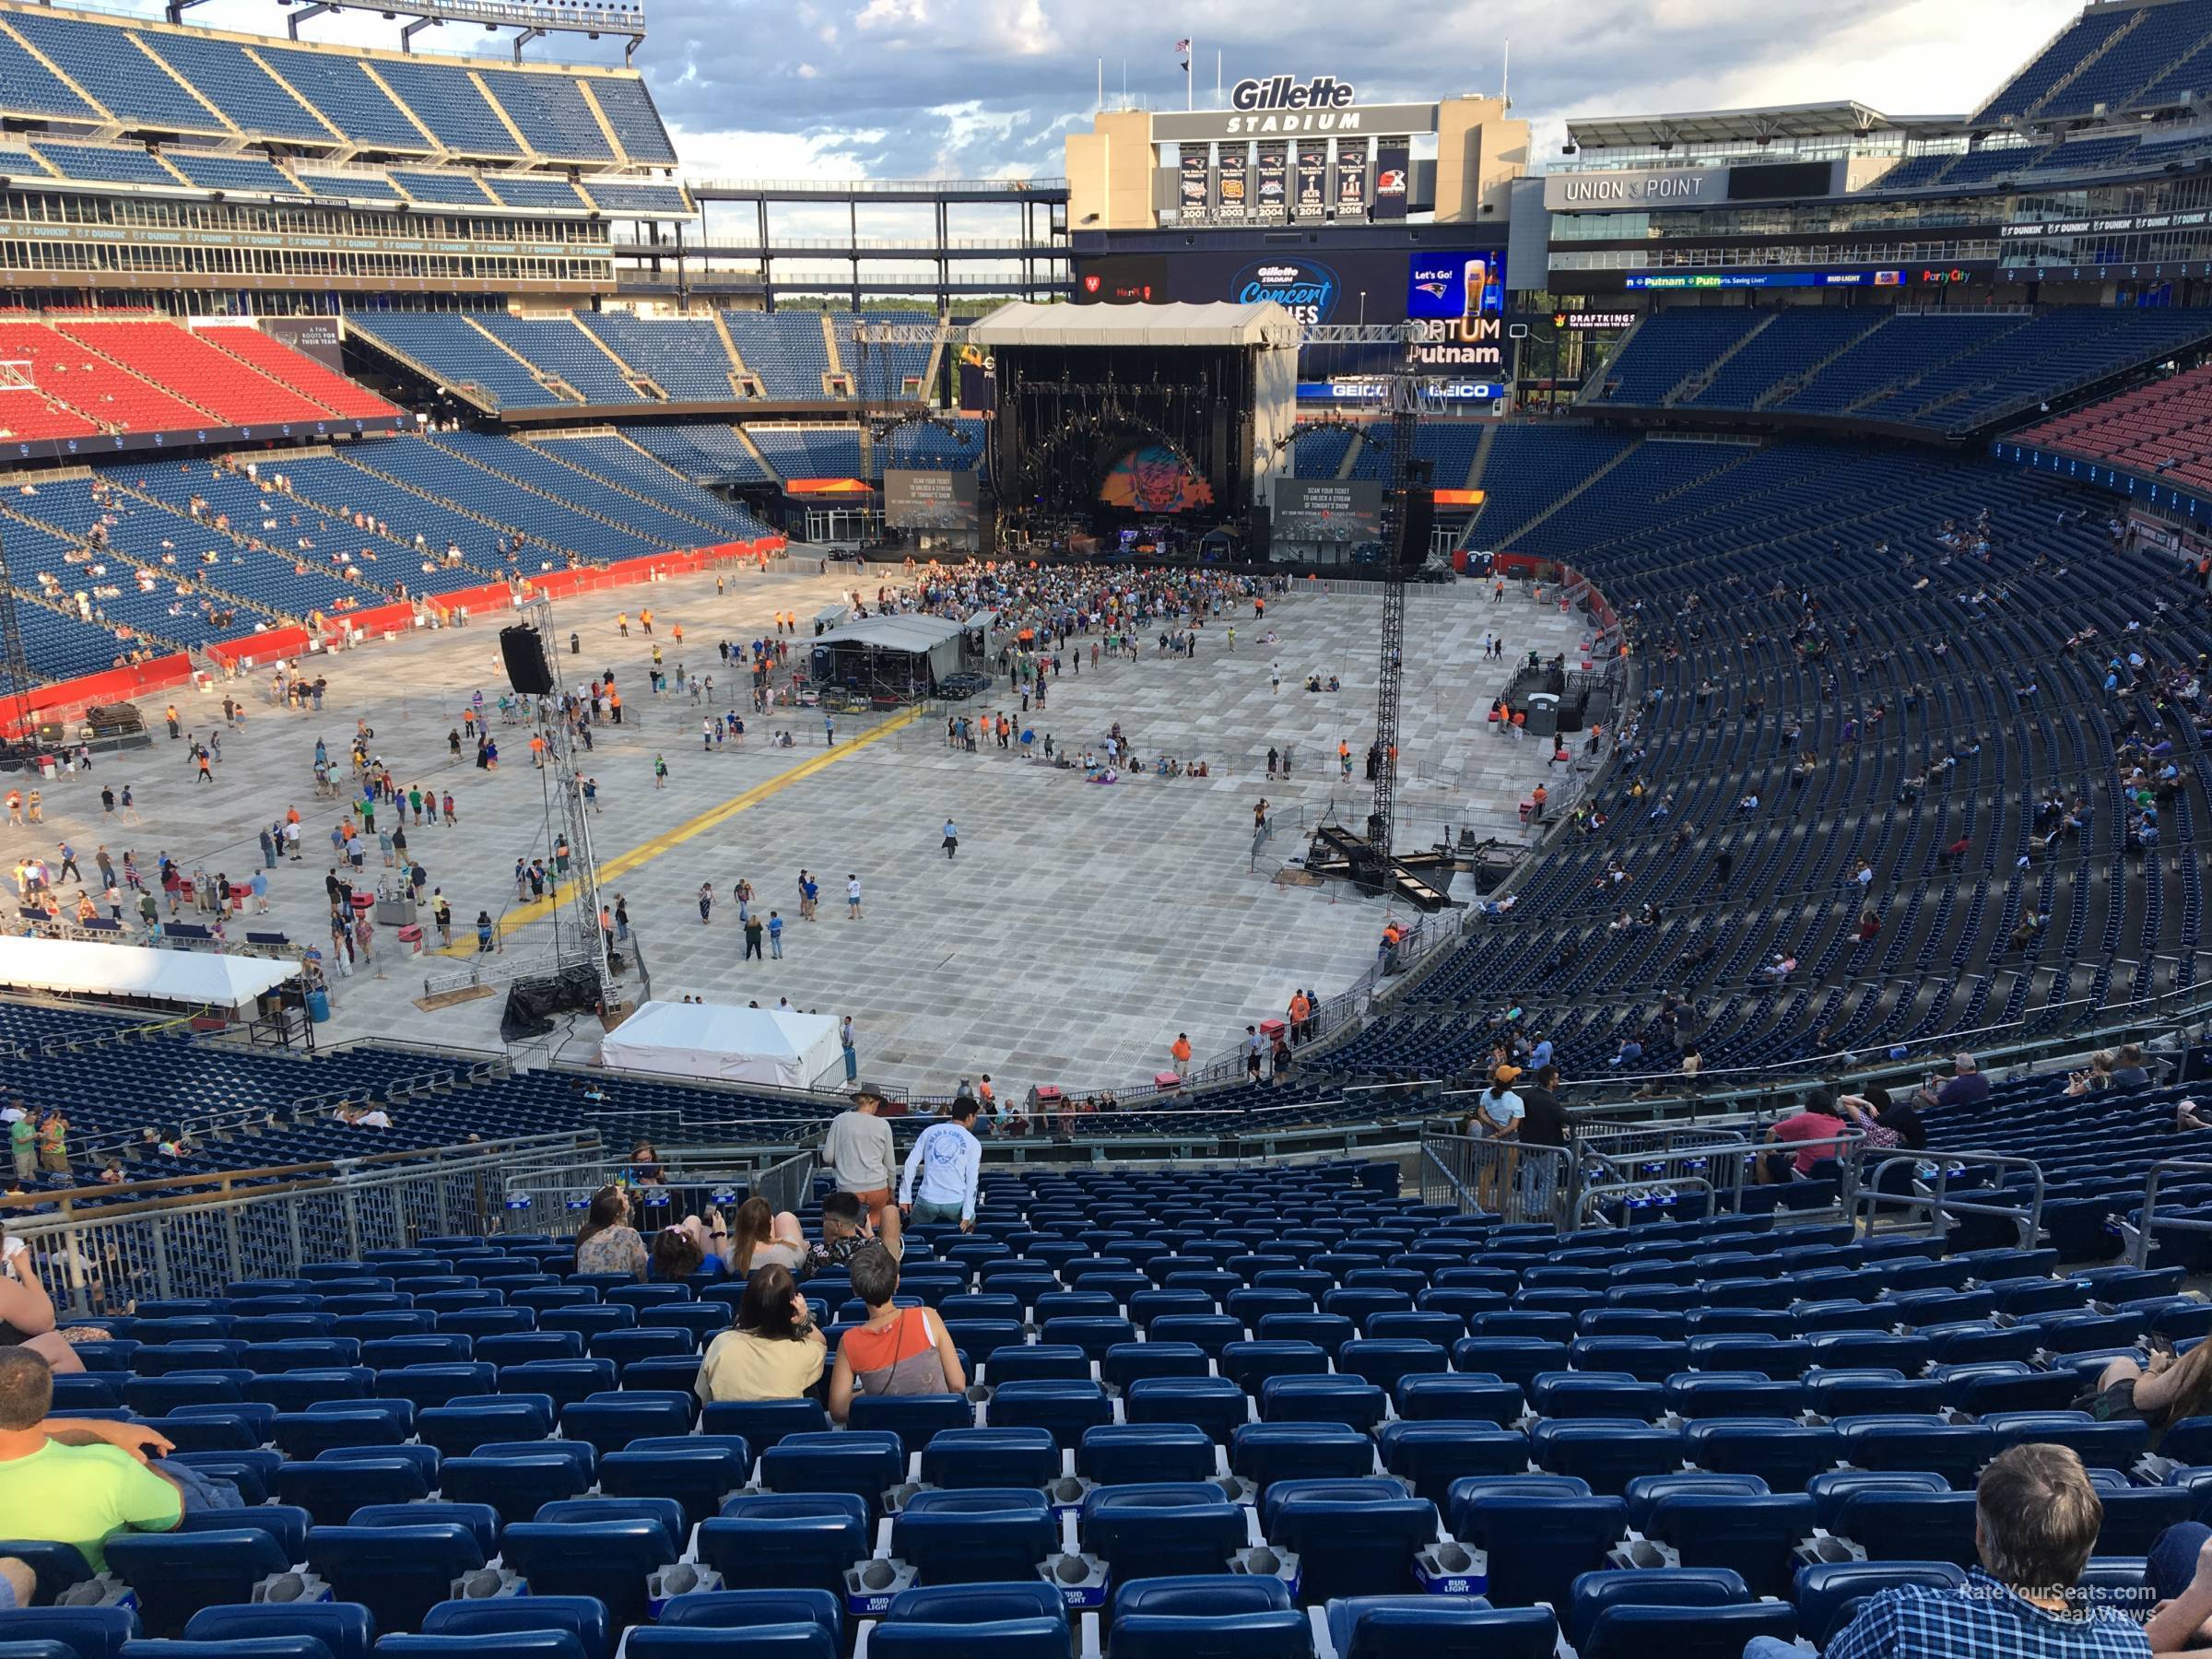 Gillette Stadium Section 240 Concert Seating - RateYourSeats.com